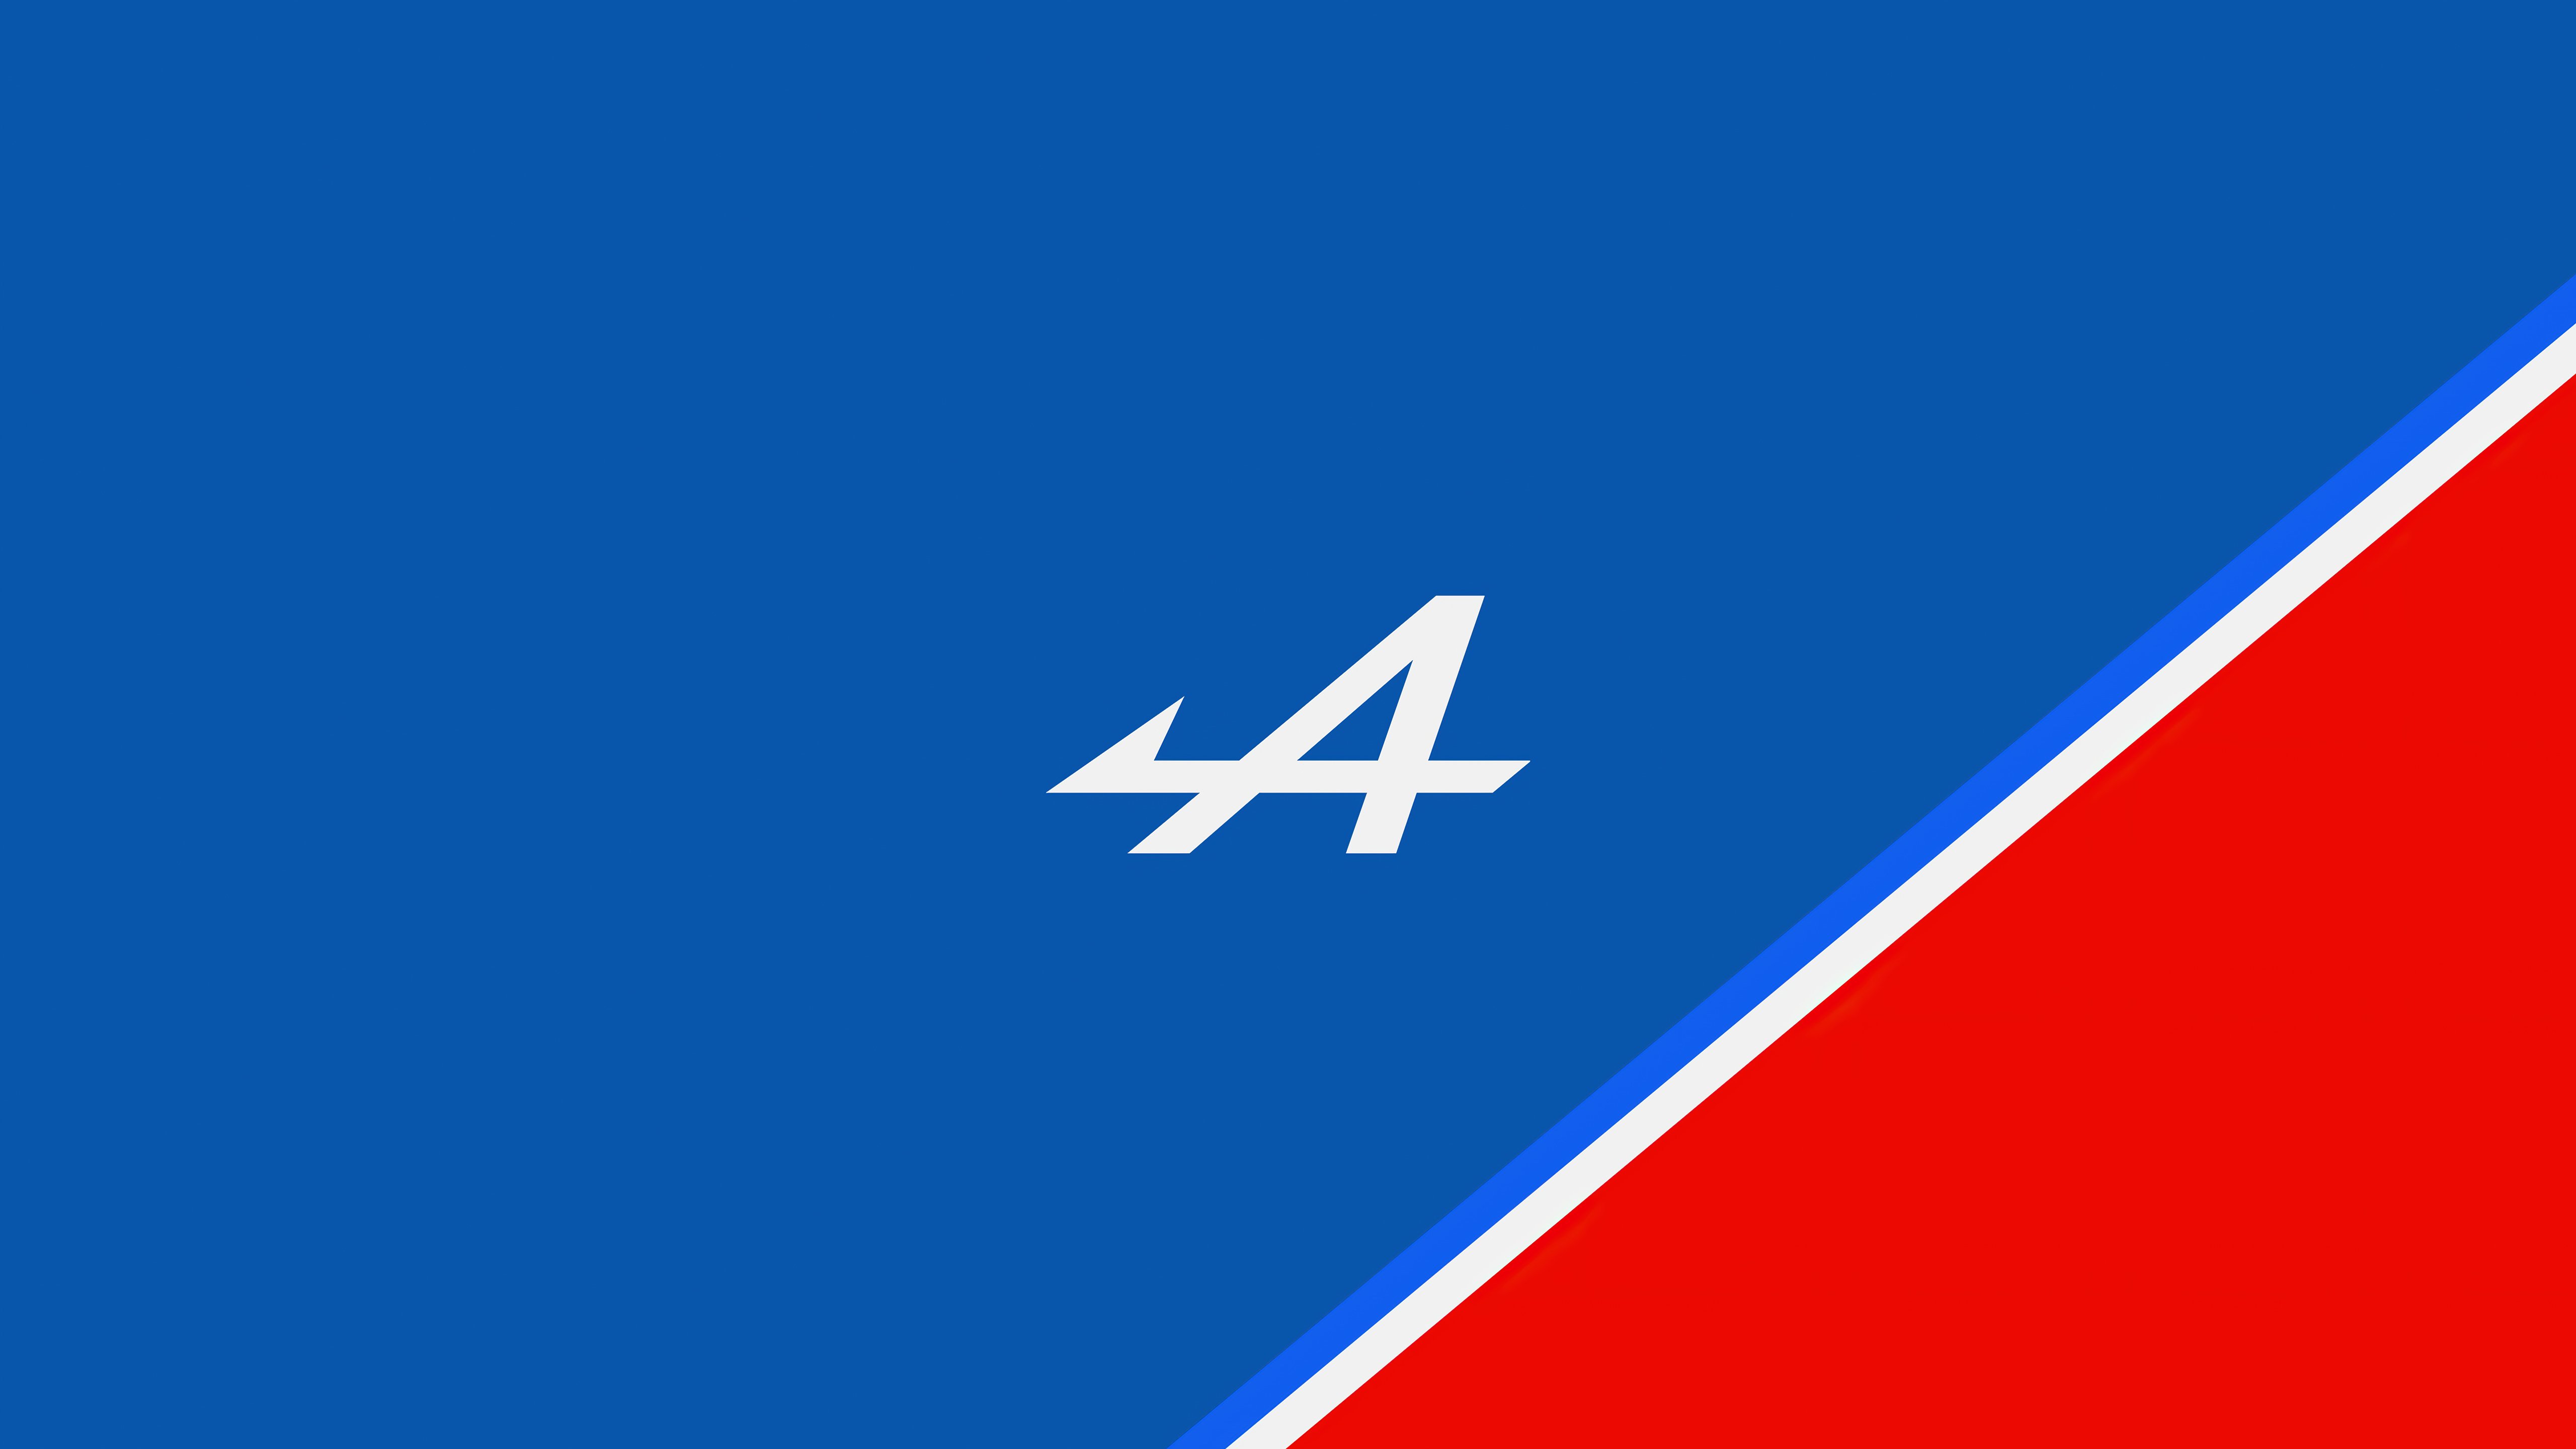 Alpine F1 Logo Minimal 1152x864 Resolution HD 4k Wallpaper, Image, Background, Photo and Picture